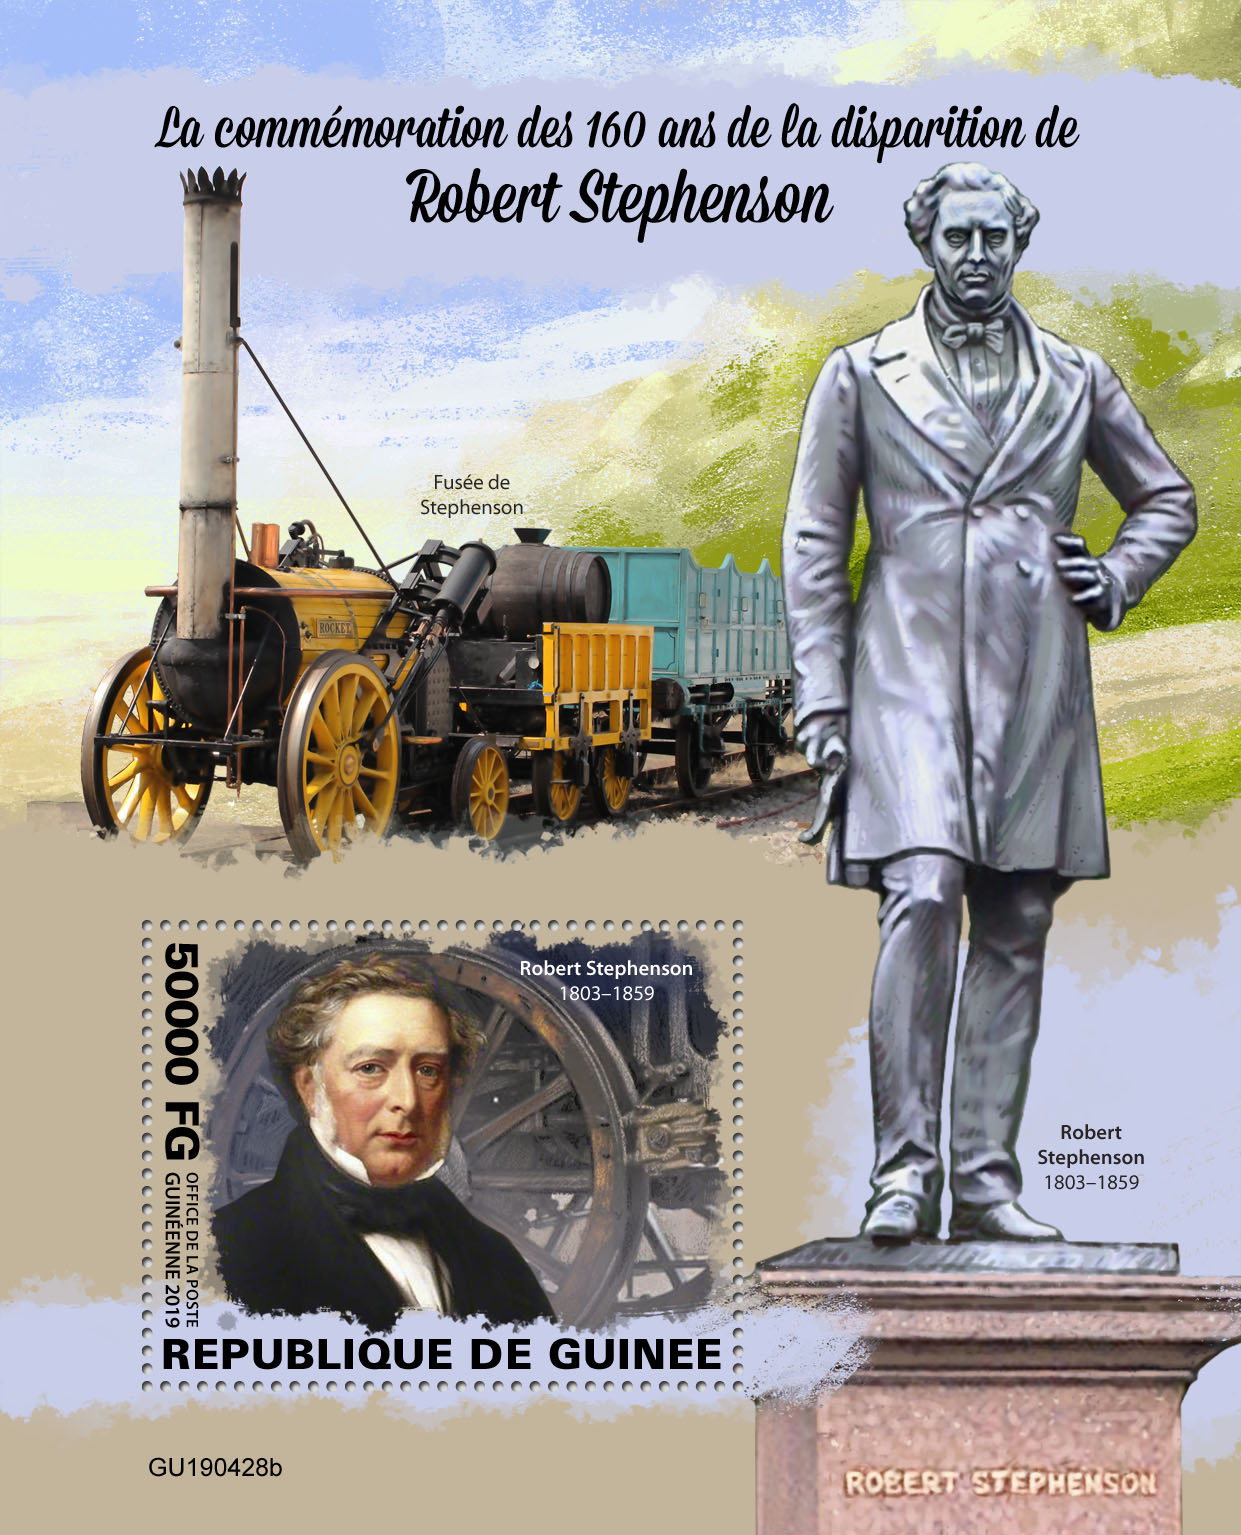 Robert Stephenson - Issue of Guinée postage stamps